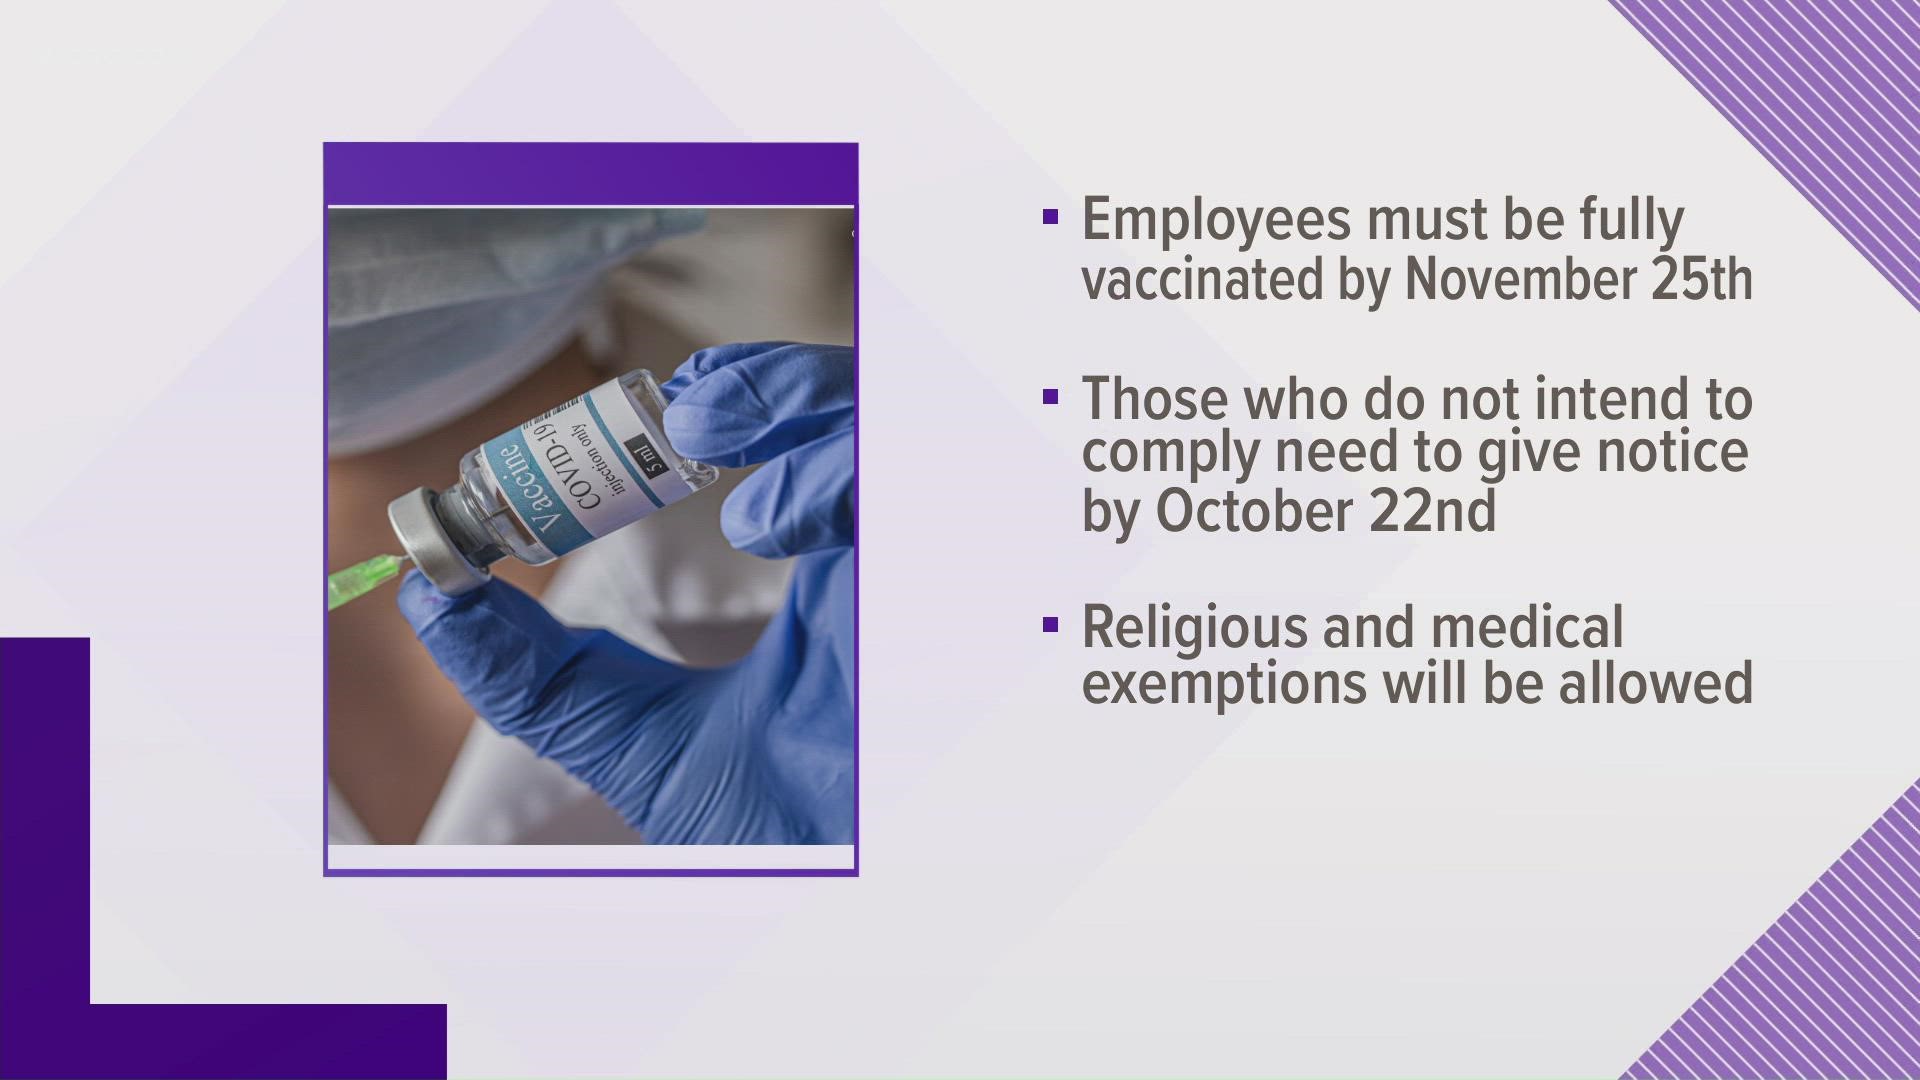 Socrates Academy in Matthews says all workers need to be fully vaccinated by Nov. 25.